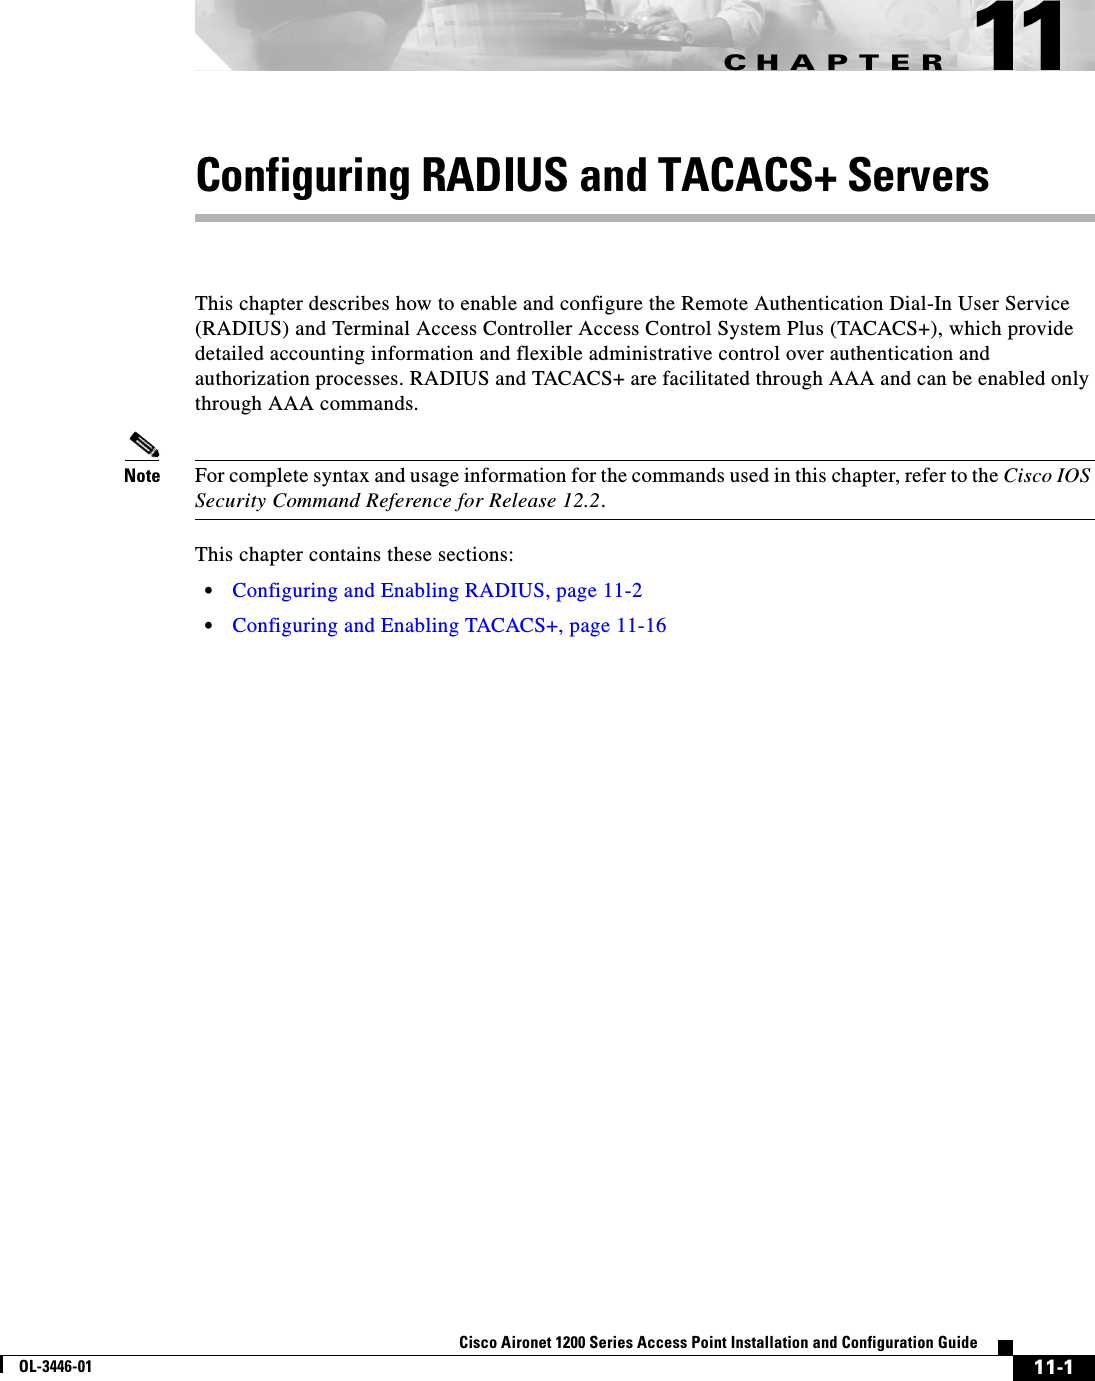 CHAPTER11-1Cisco Aironet 1200 Series Access Point Installation and Configuration GuideOL-3446-0111Configuring RADIUS and TACACS+ ServersThis chapter describes how to enable and configure the Remote Authentication Dial-In User Service (RADIUS) and Terminal Access Controller Access Control System Plus (TACACS+), which provide detailed accounting information and flexible administrative control over authentication and authorization processes. RADIUS and TACACS+ are facilitated through AAA and can be enabled only through AAA commands.Note For complete syntax and usage information for the commands used in this chapter, refer to the Cisco IOS Security Command Reference for Release 12.2.This chapter contains these sections:•Configuring and Enabling RADIUS, page 11-2•Configuring and Enabling TACACS+, page 11-16